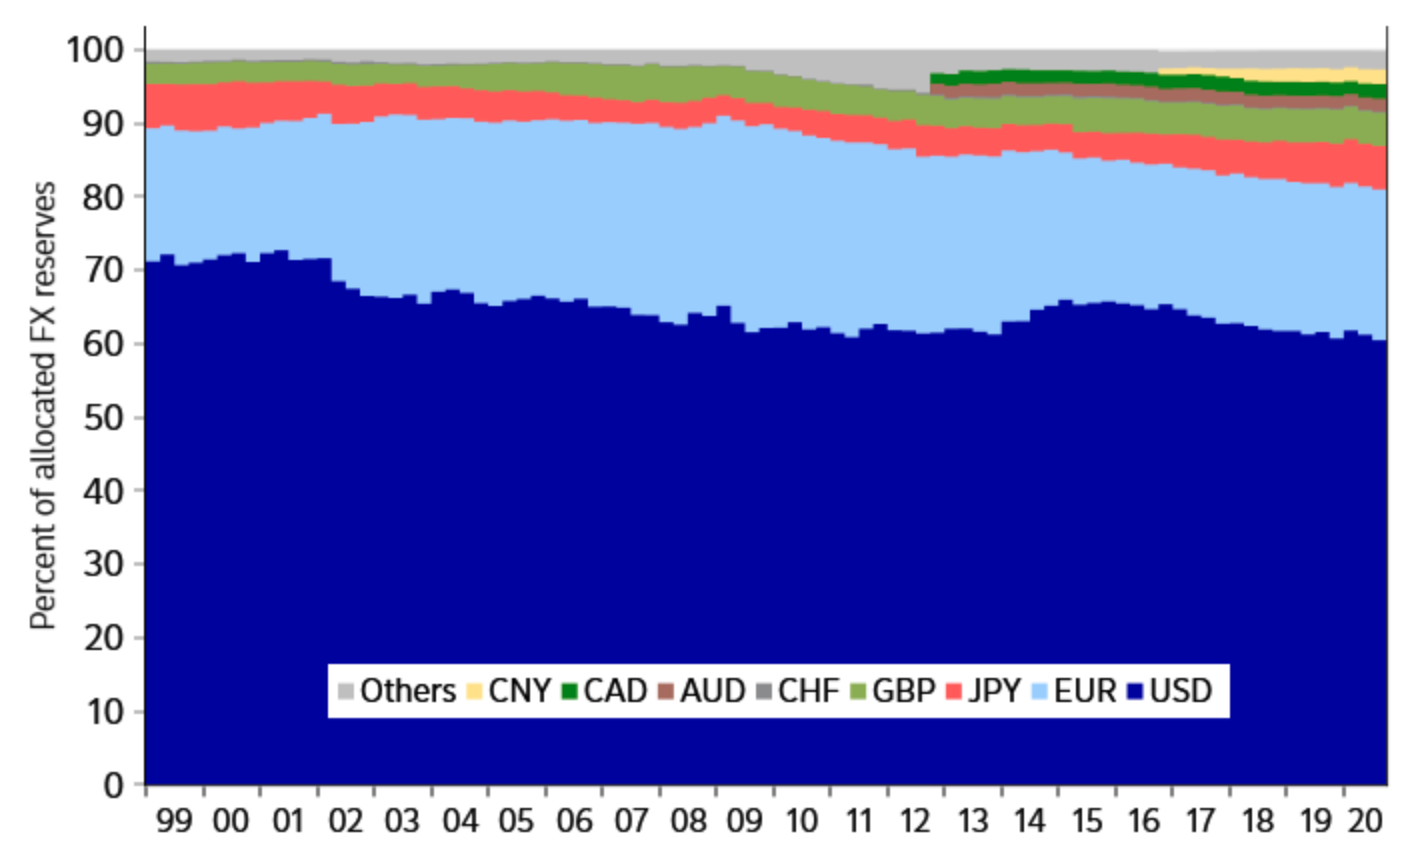 Global reserves, by currency